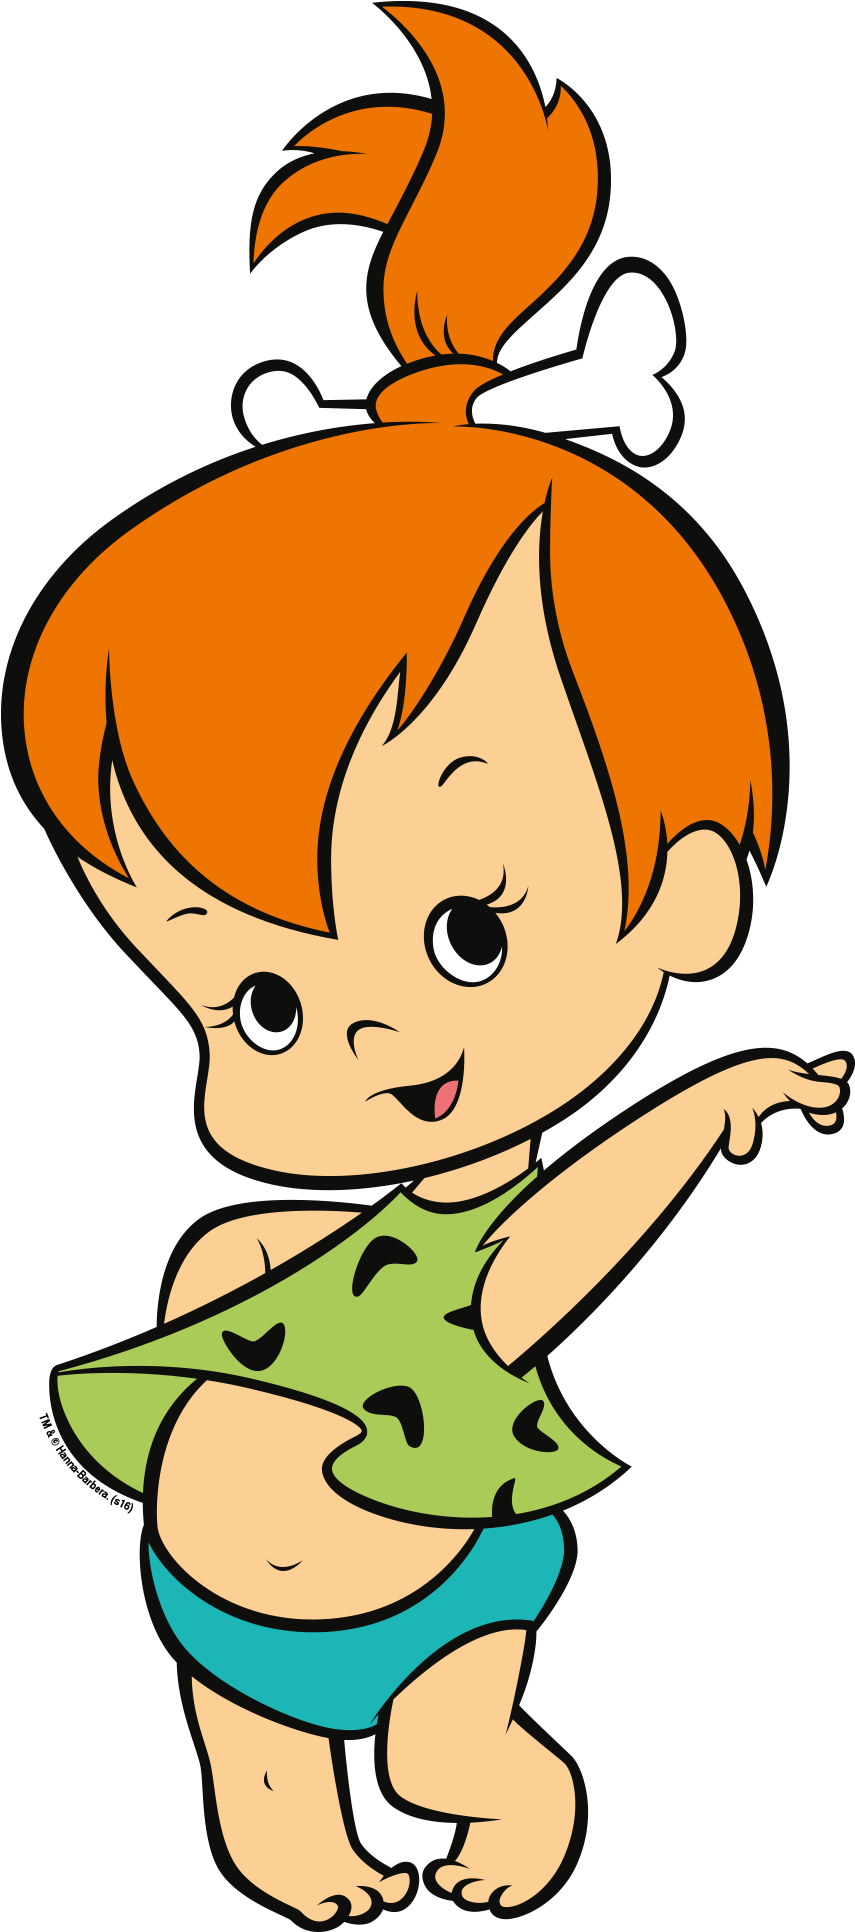 Download and share clipart about Pebbles Flinstone Wilma Flintstone Party I...